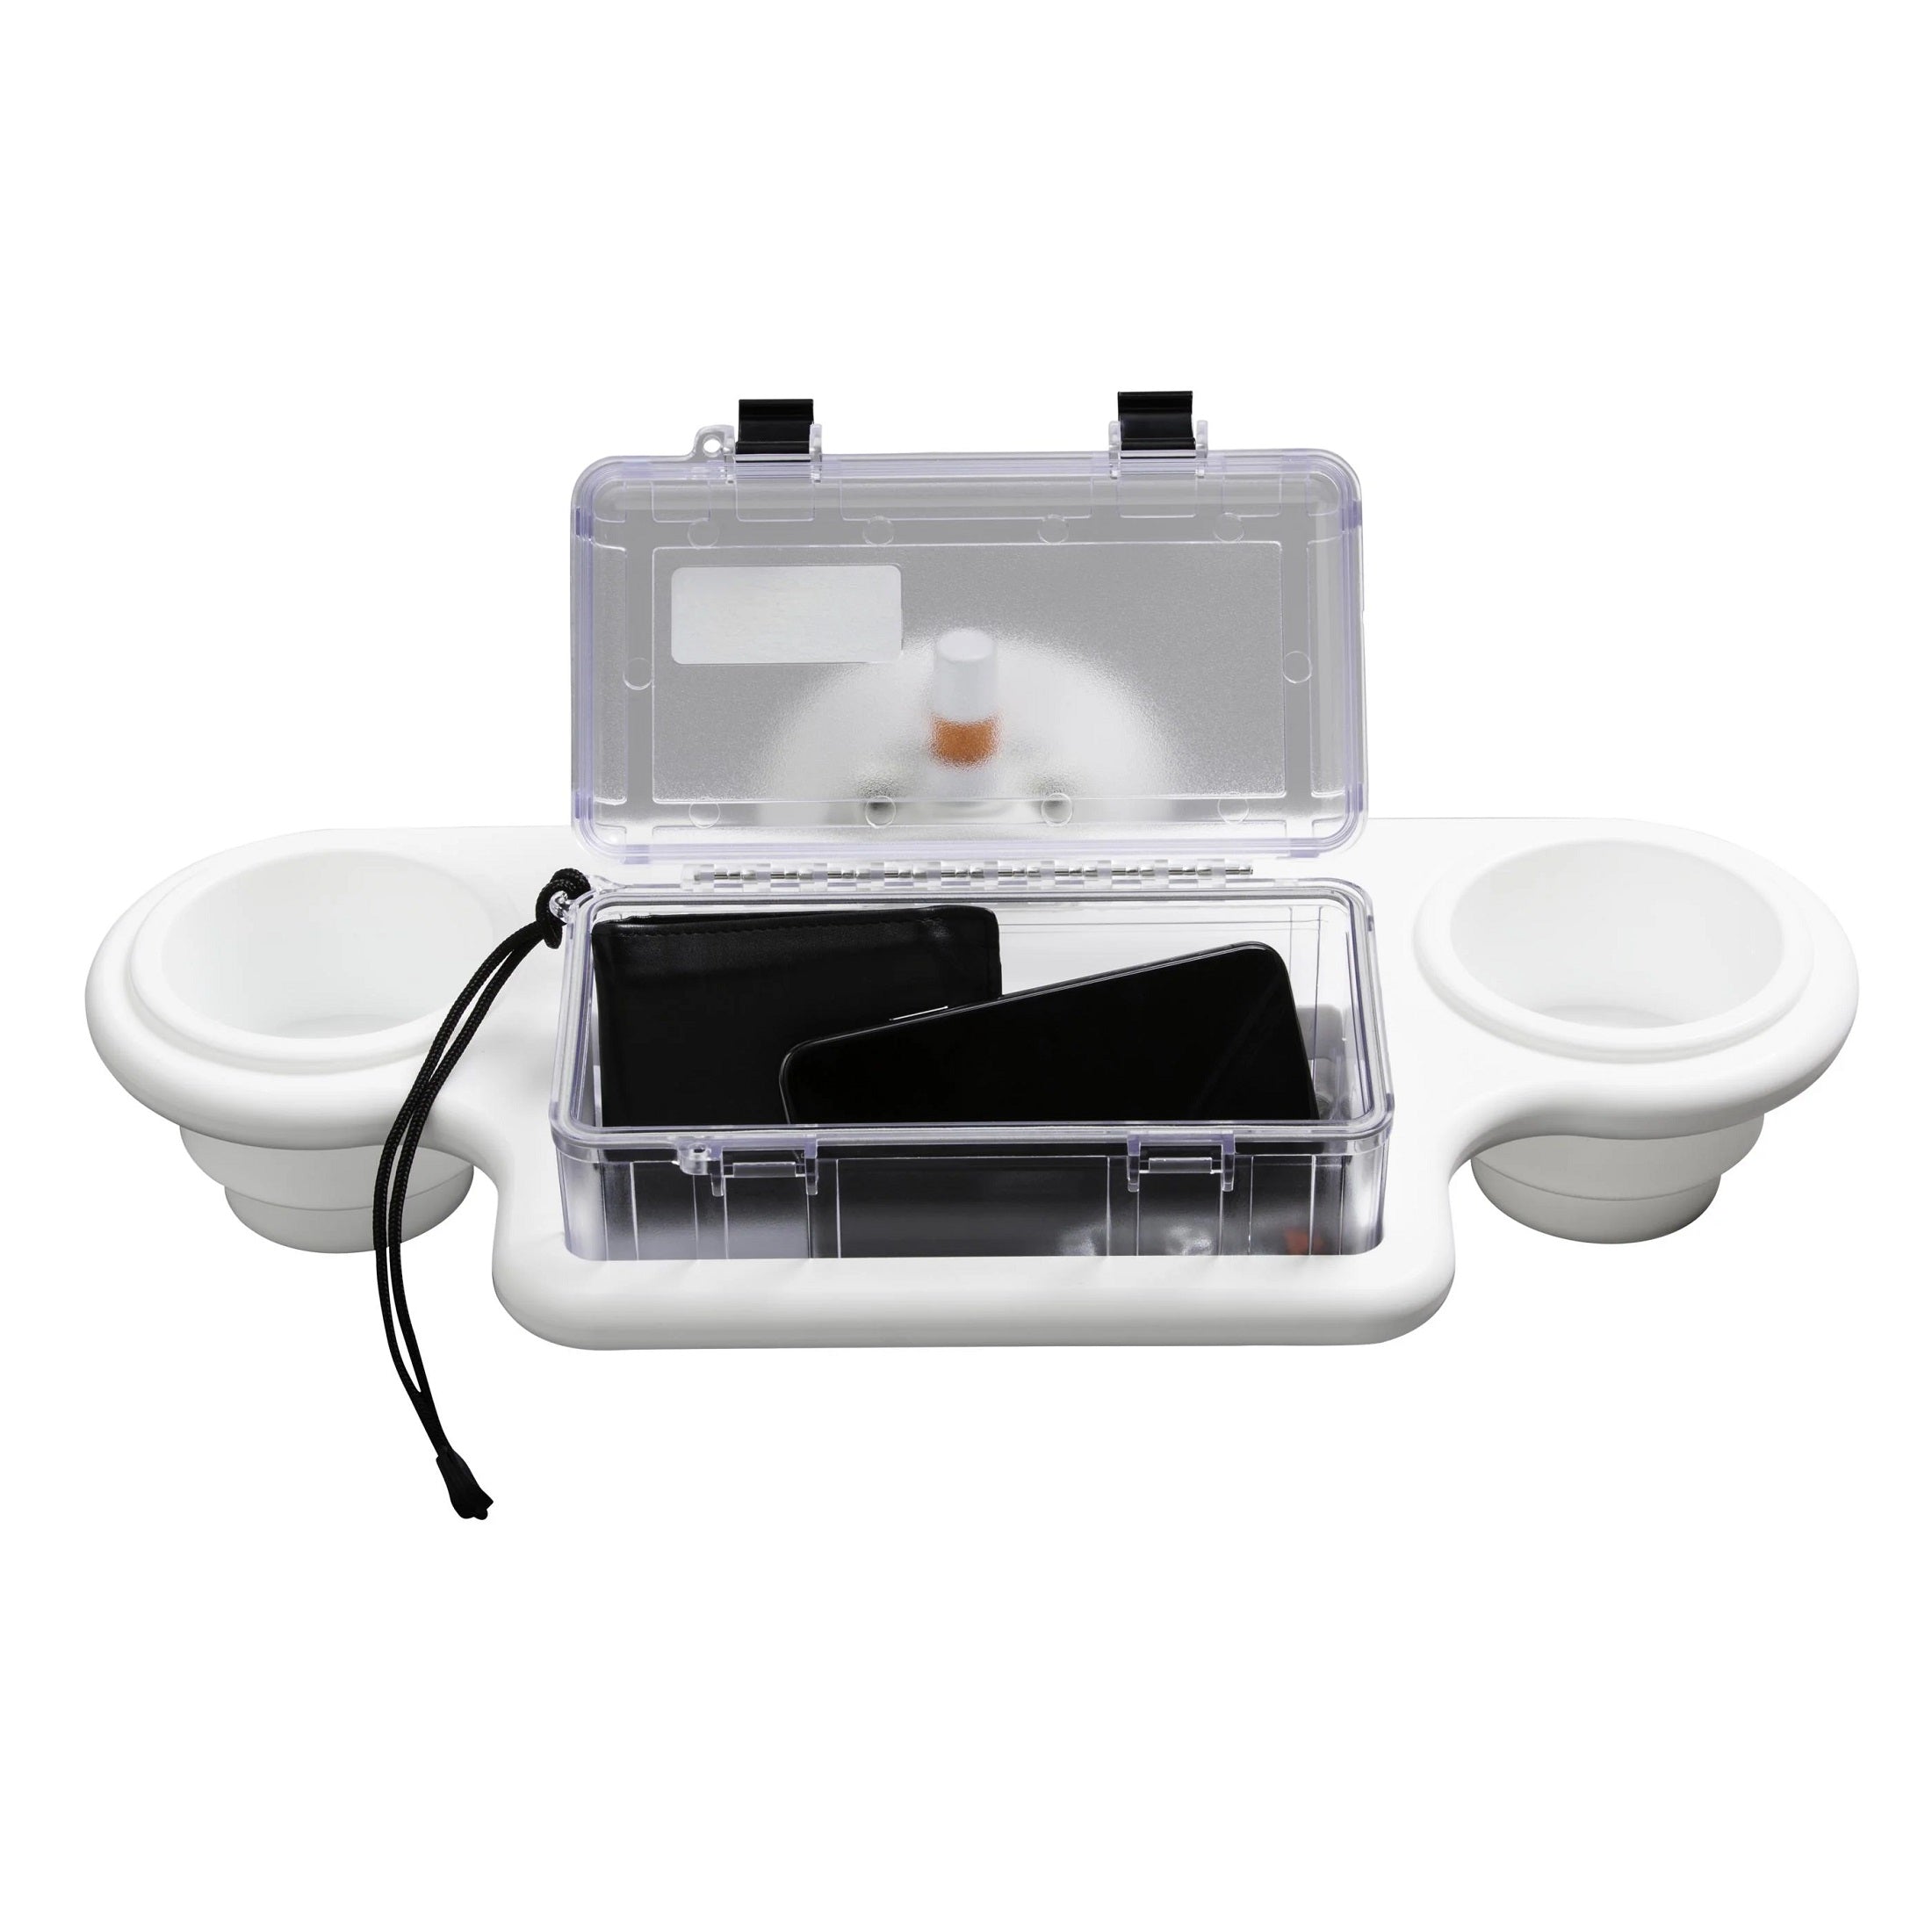 2 Cup Holder With Dry Box